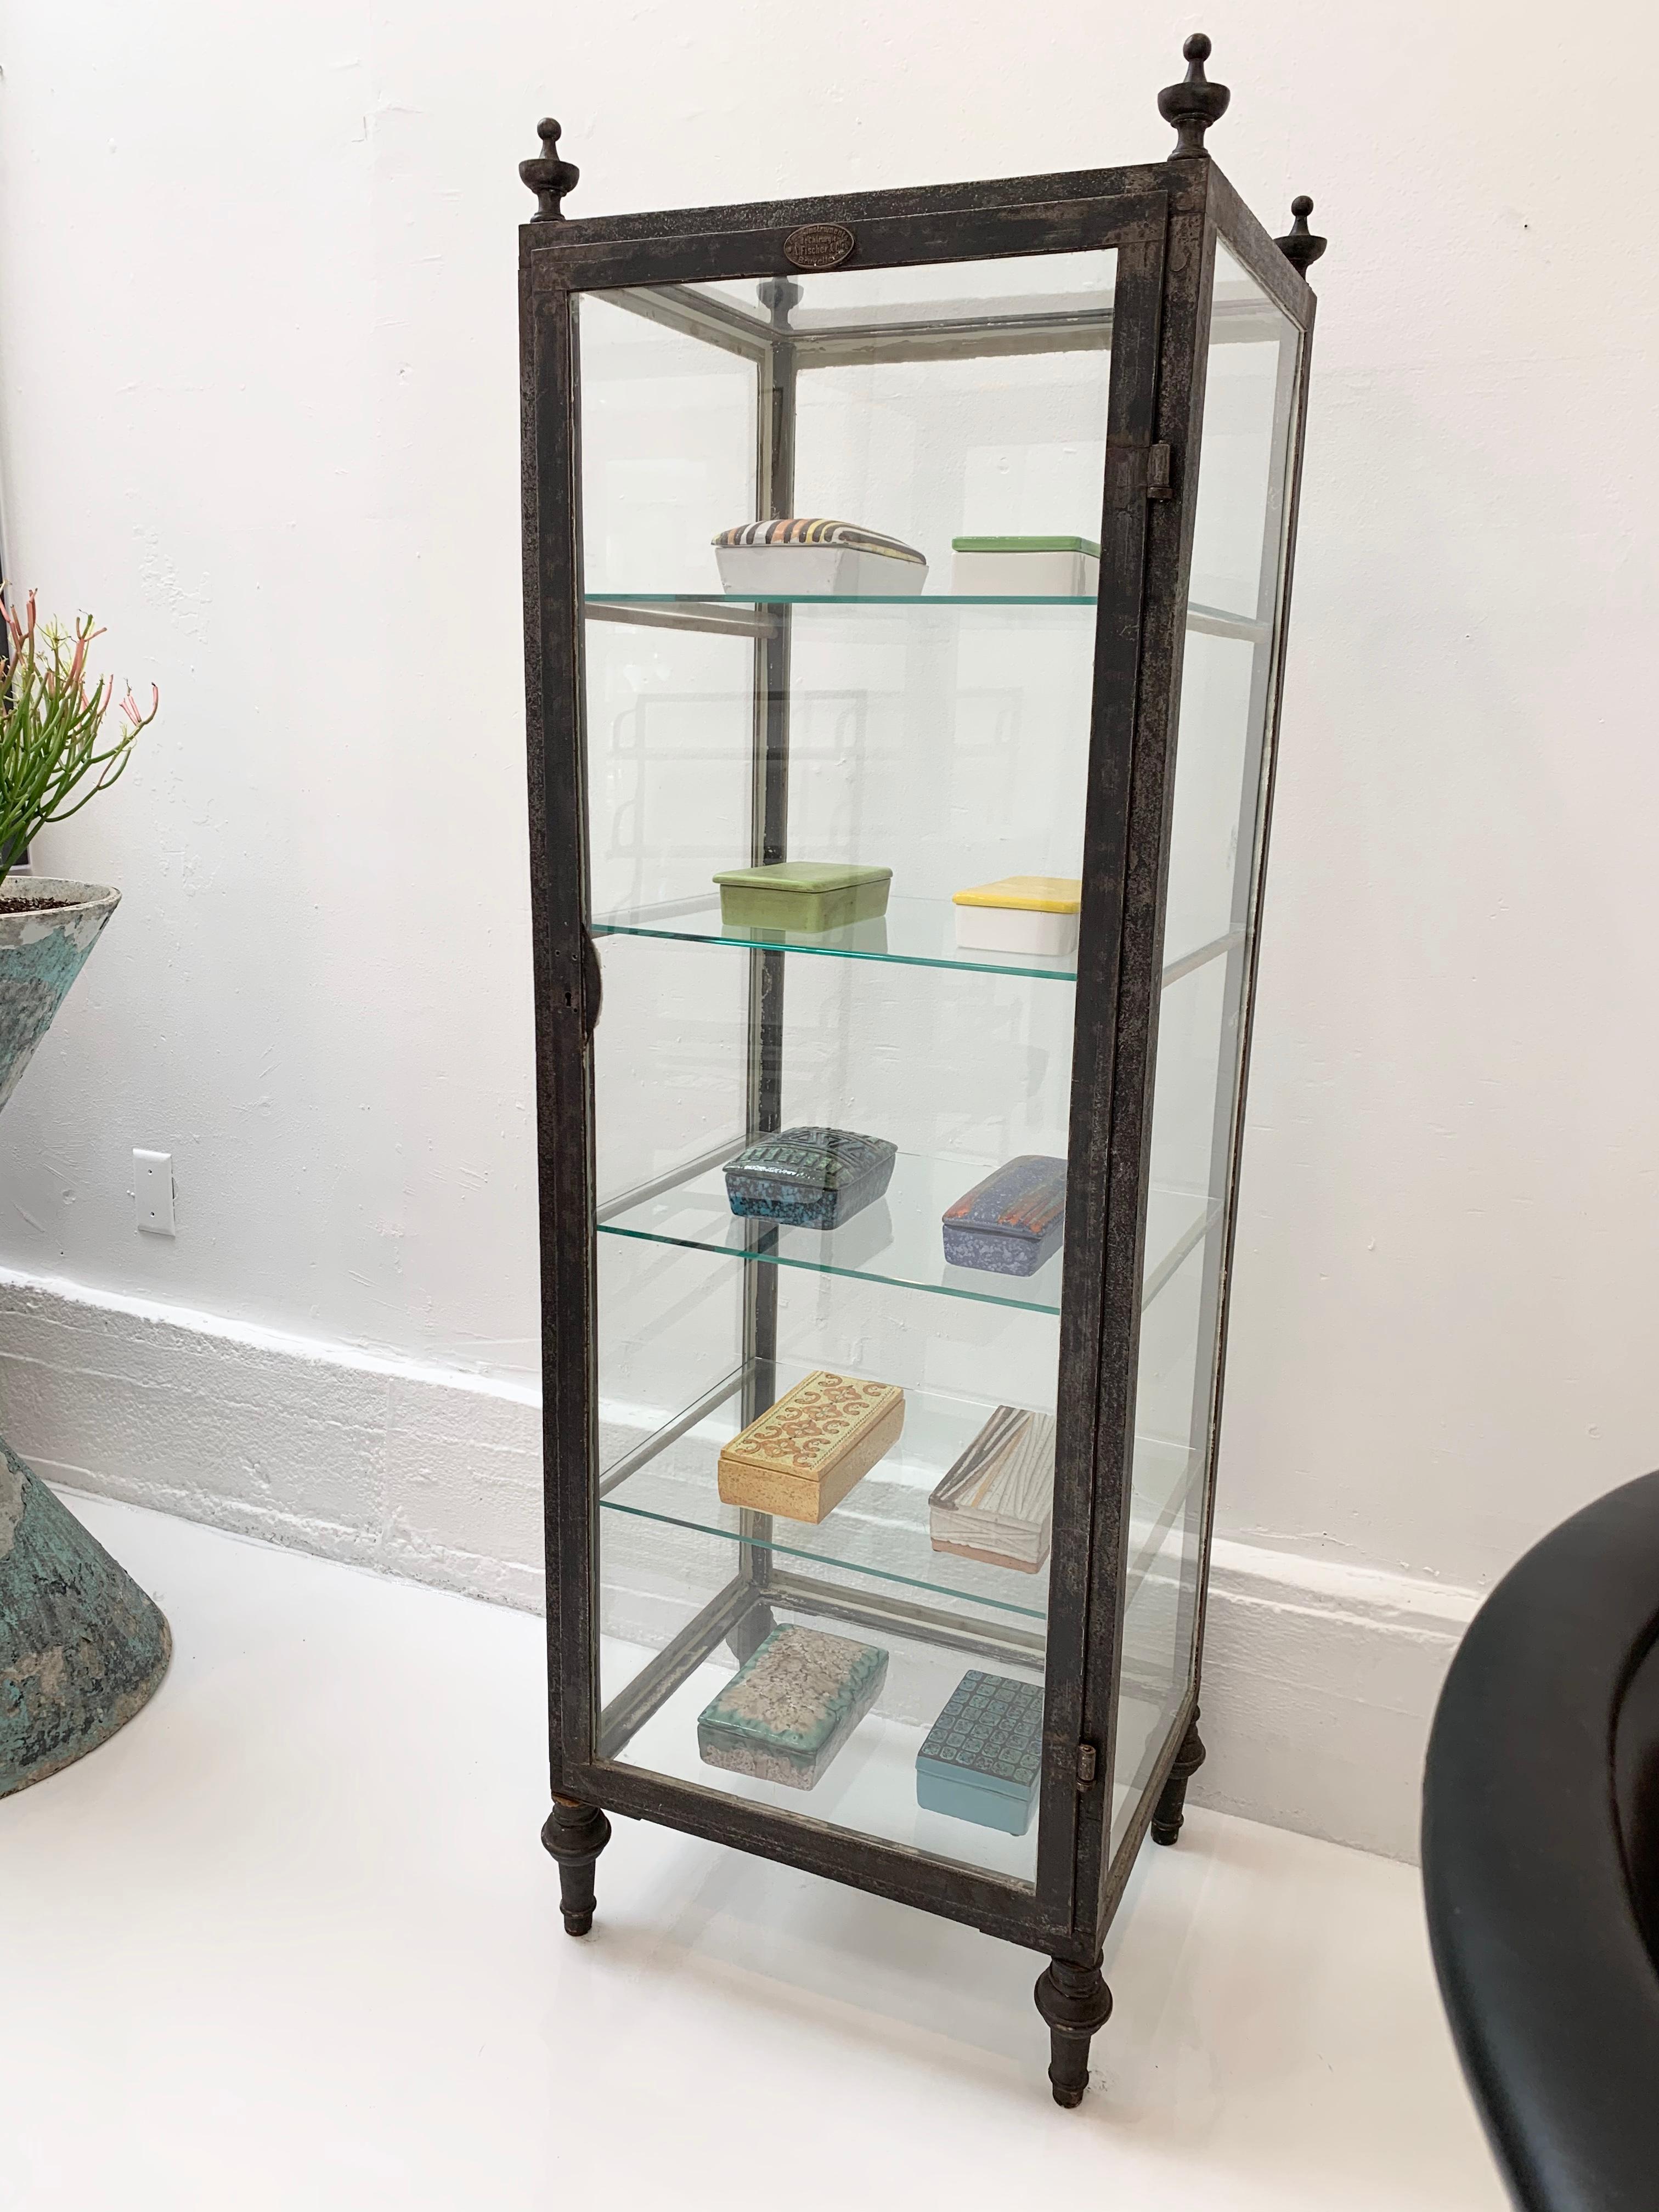 Slender Art Deco vitrine made in the 1930s Brussels, Belgium. Rectangular frame sitting atop post legs with finial top. Original glass frame with rare glass top. Four new glass shelves. Original working lock with skeleton key. Fantastic display